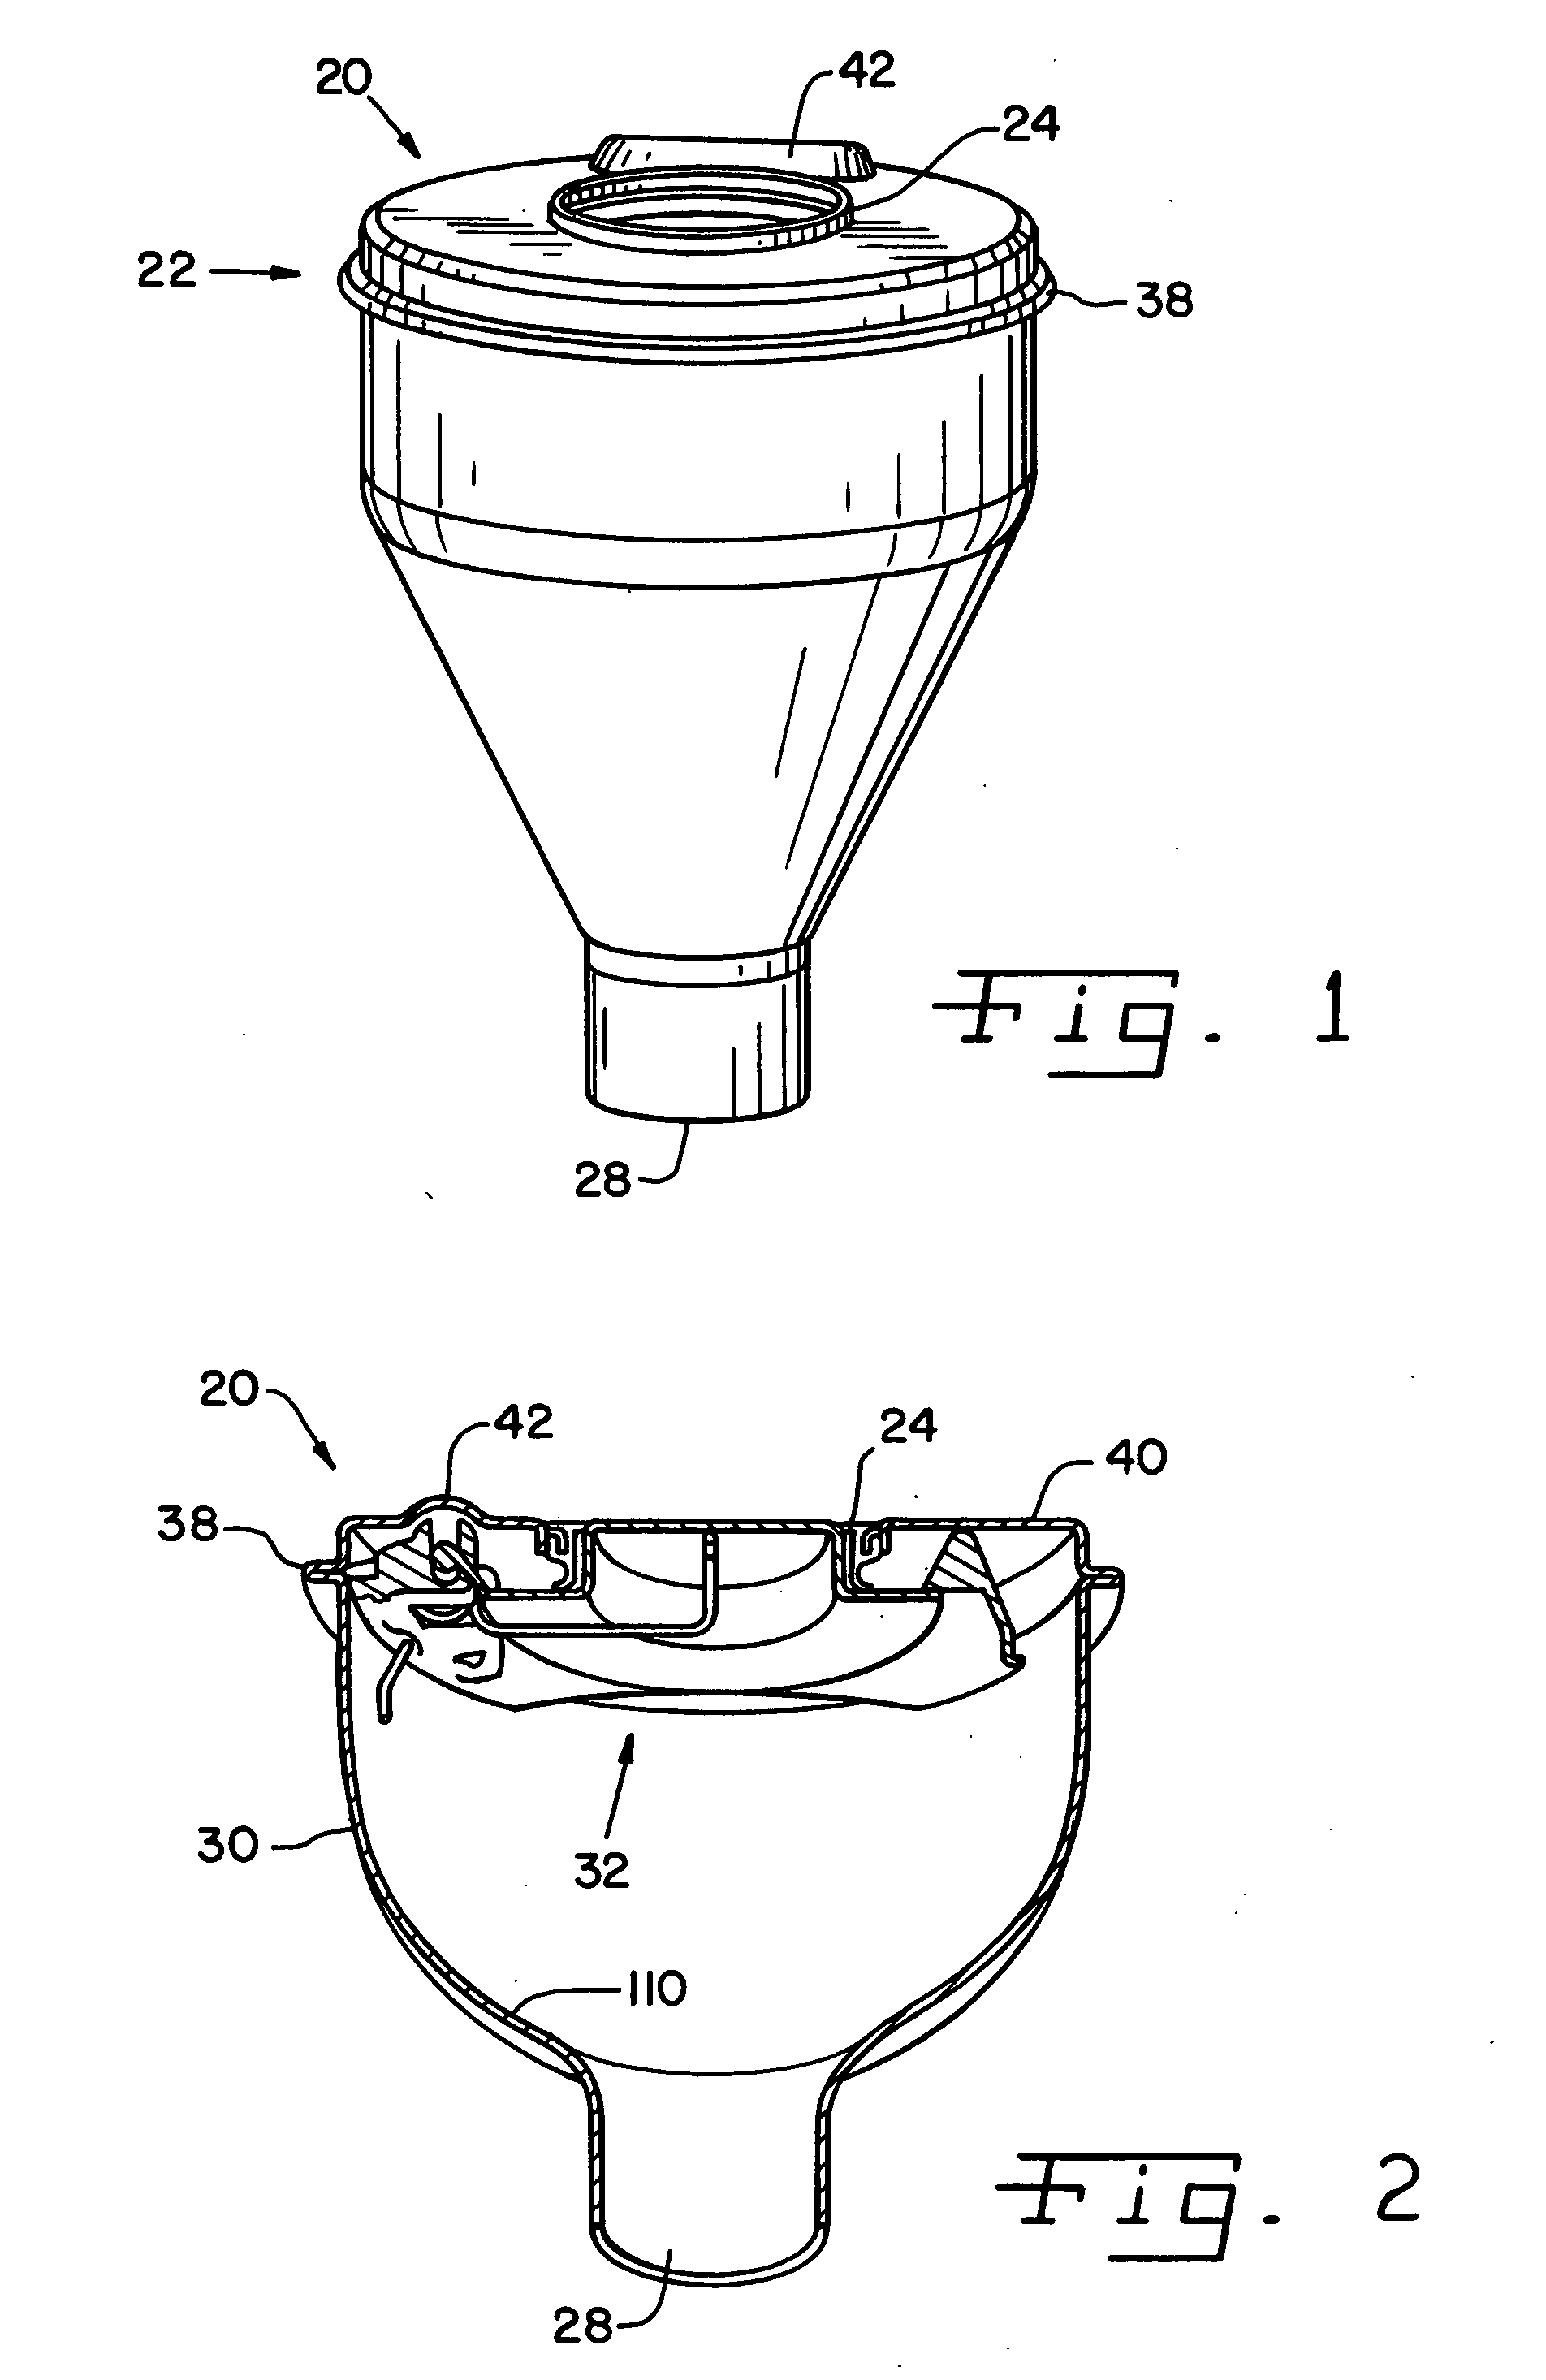 Fuel shut-off valve assembly with associated components and methods of making and assembling the same